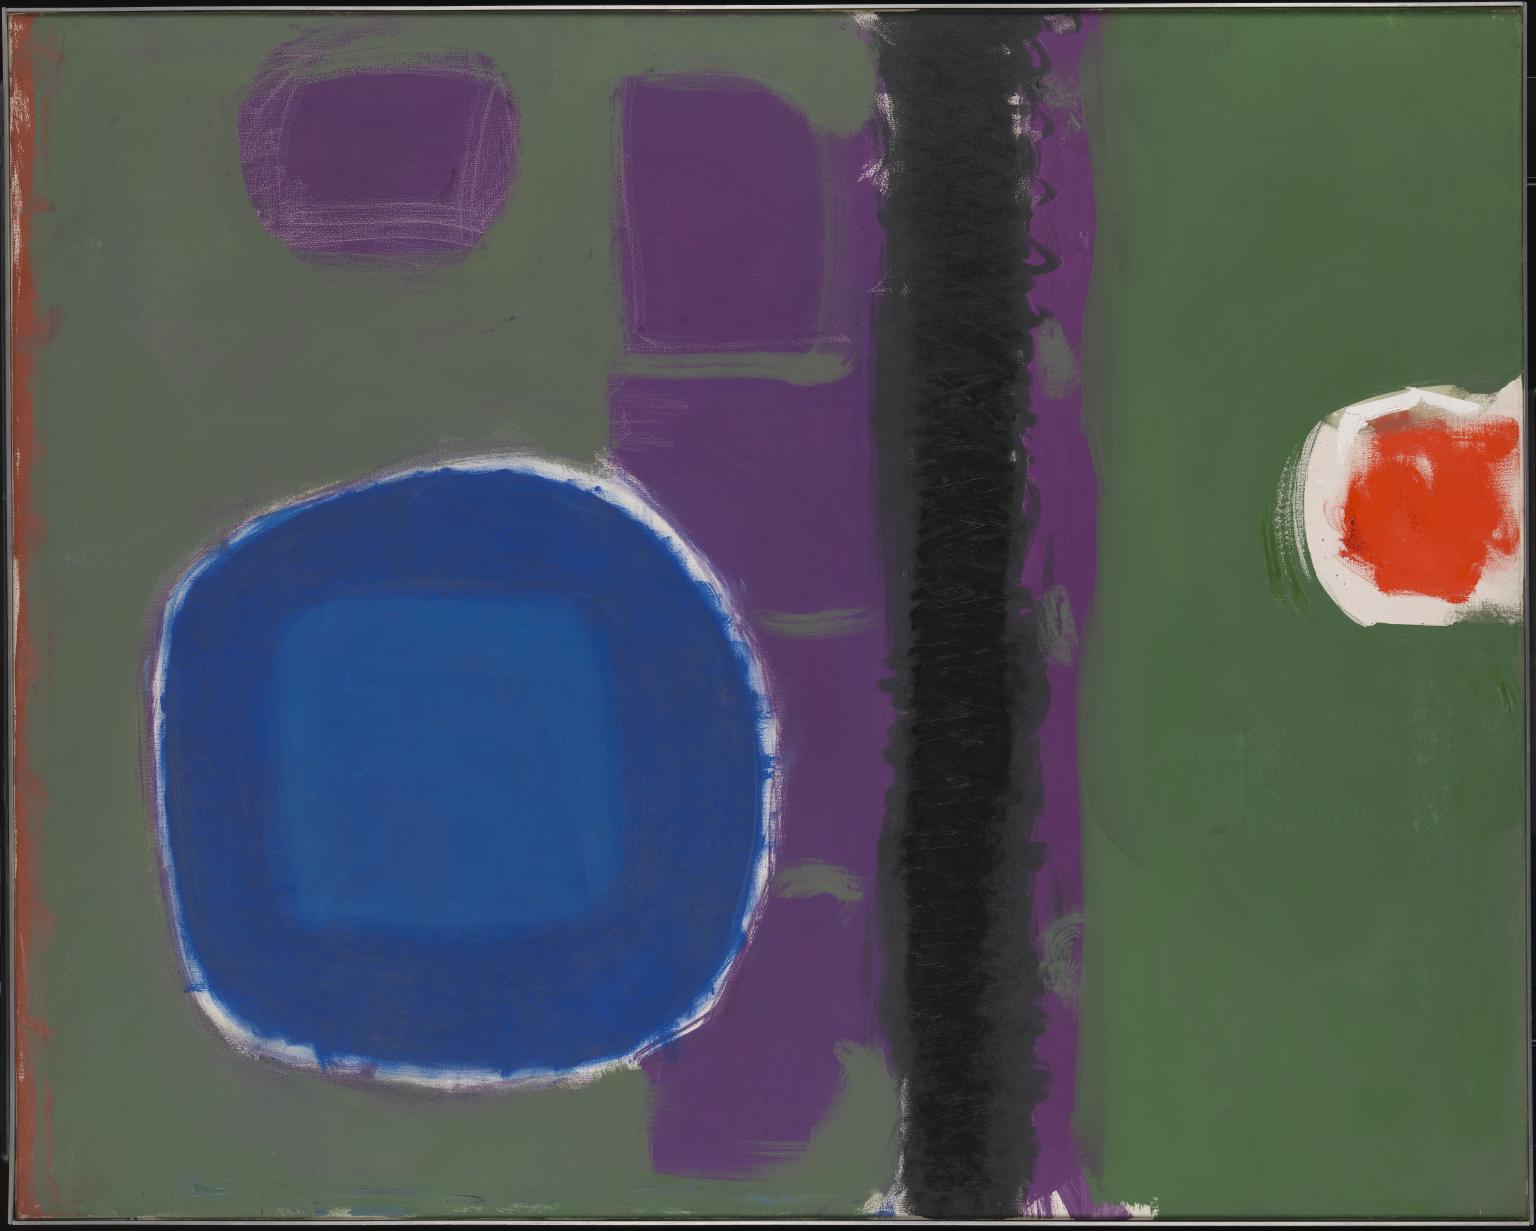 T00392: Green and Purple Painting with Blue Disc : May 1960